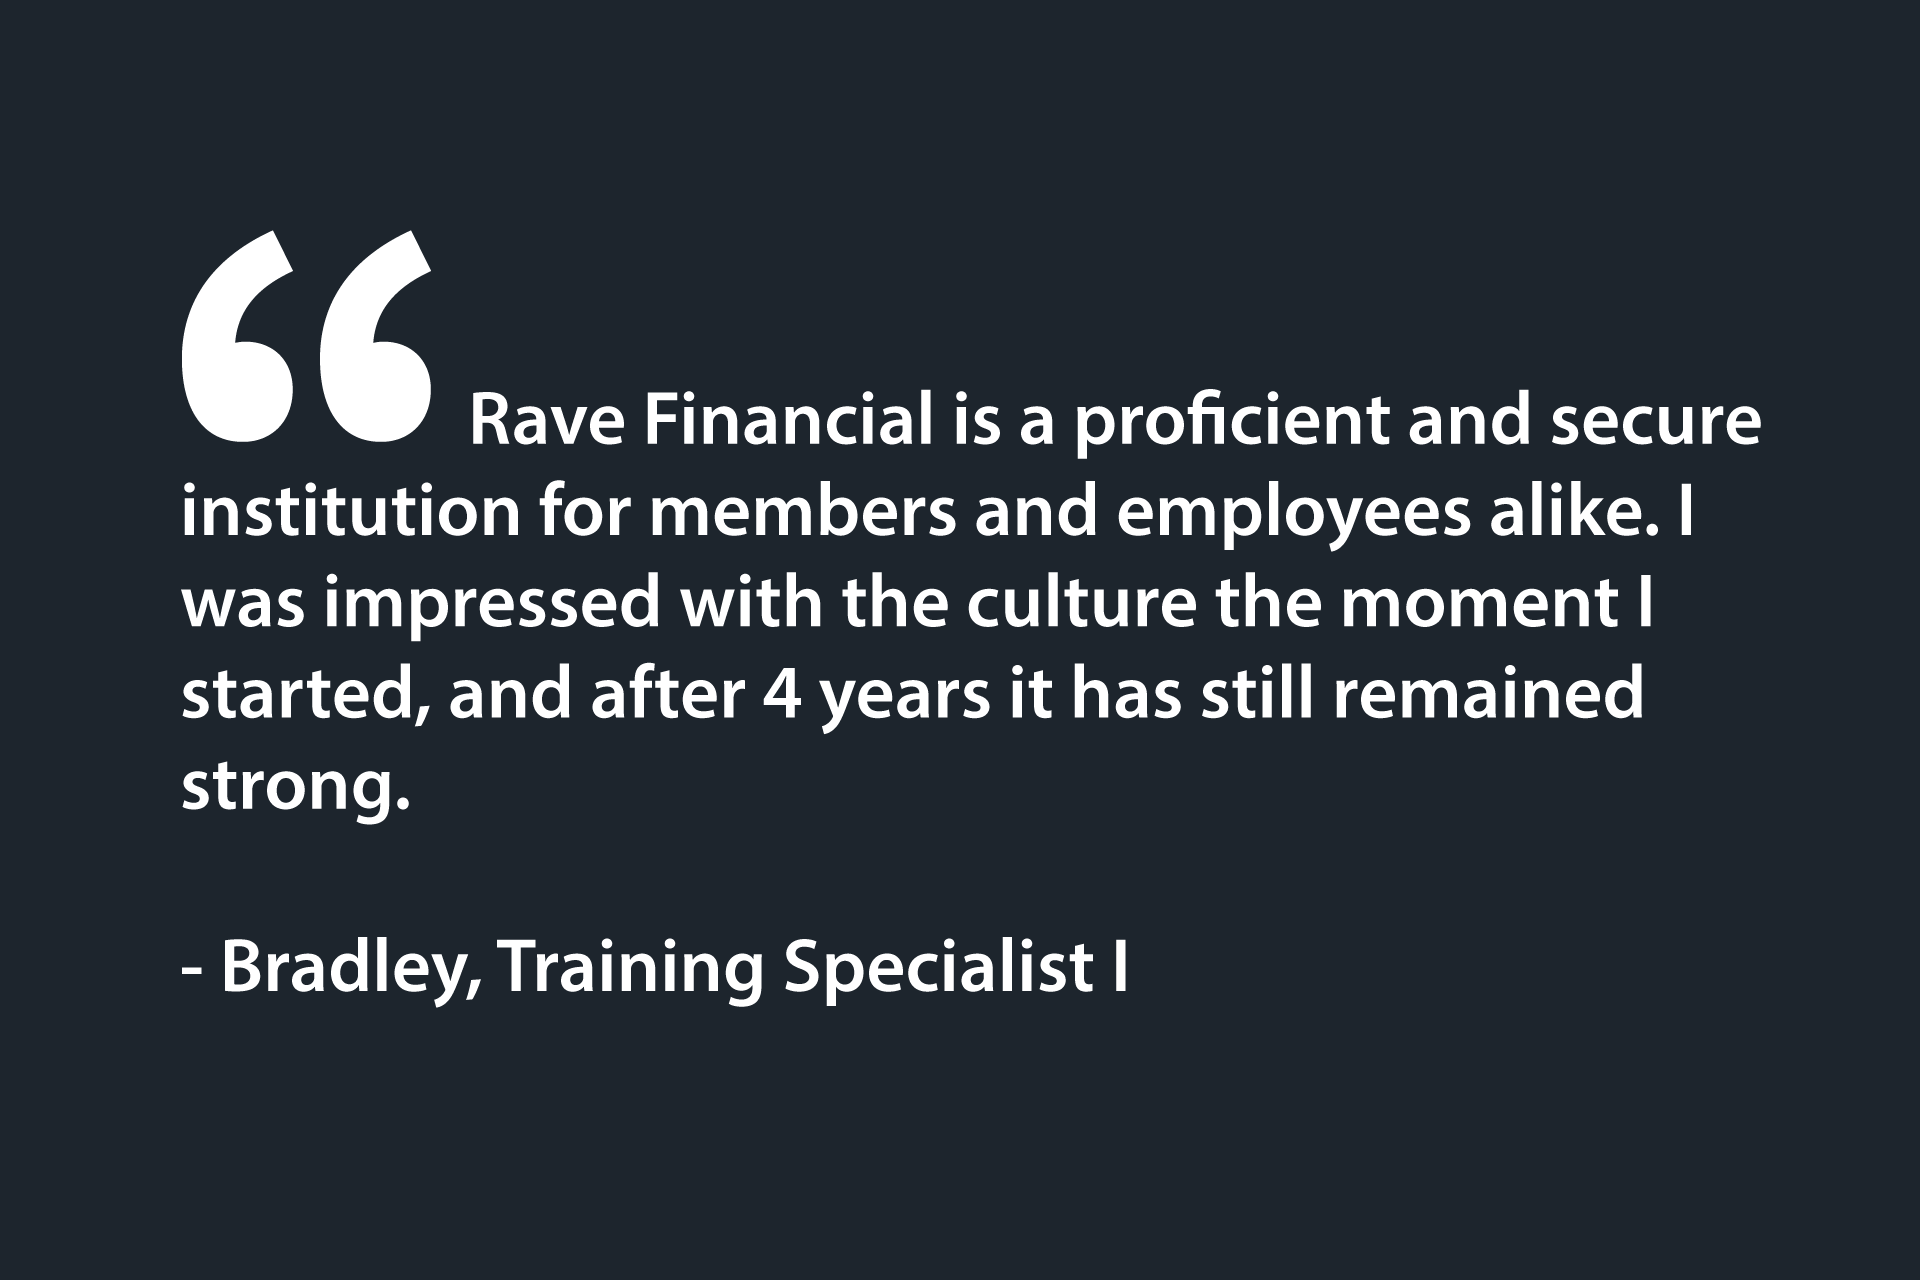 Rave Financial is a proficient and secure institution for members and employees alike. I was impressed with the culture the moment I started, and after 4 years it has still remained strong. - Bradley, Training Specialist I